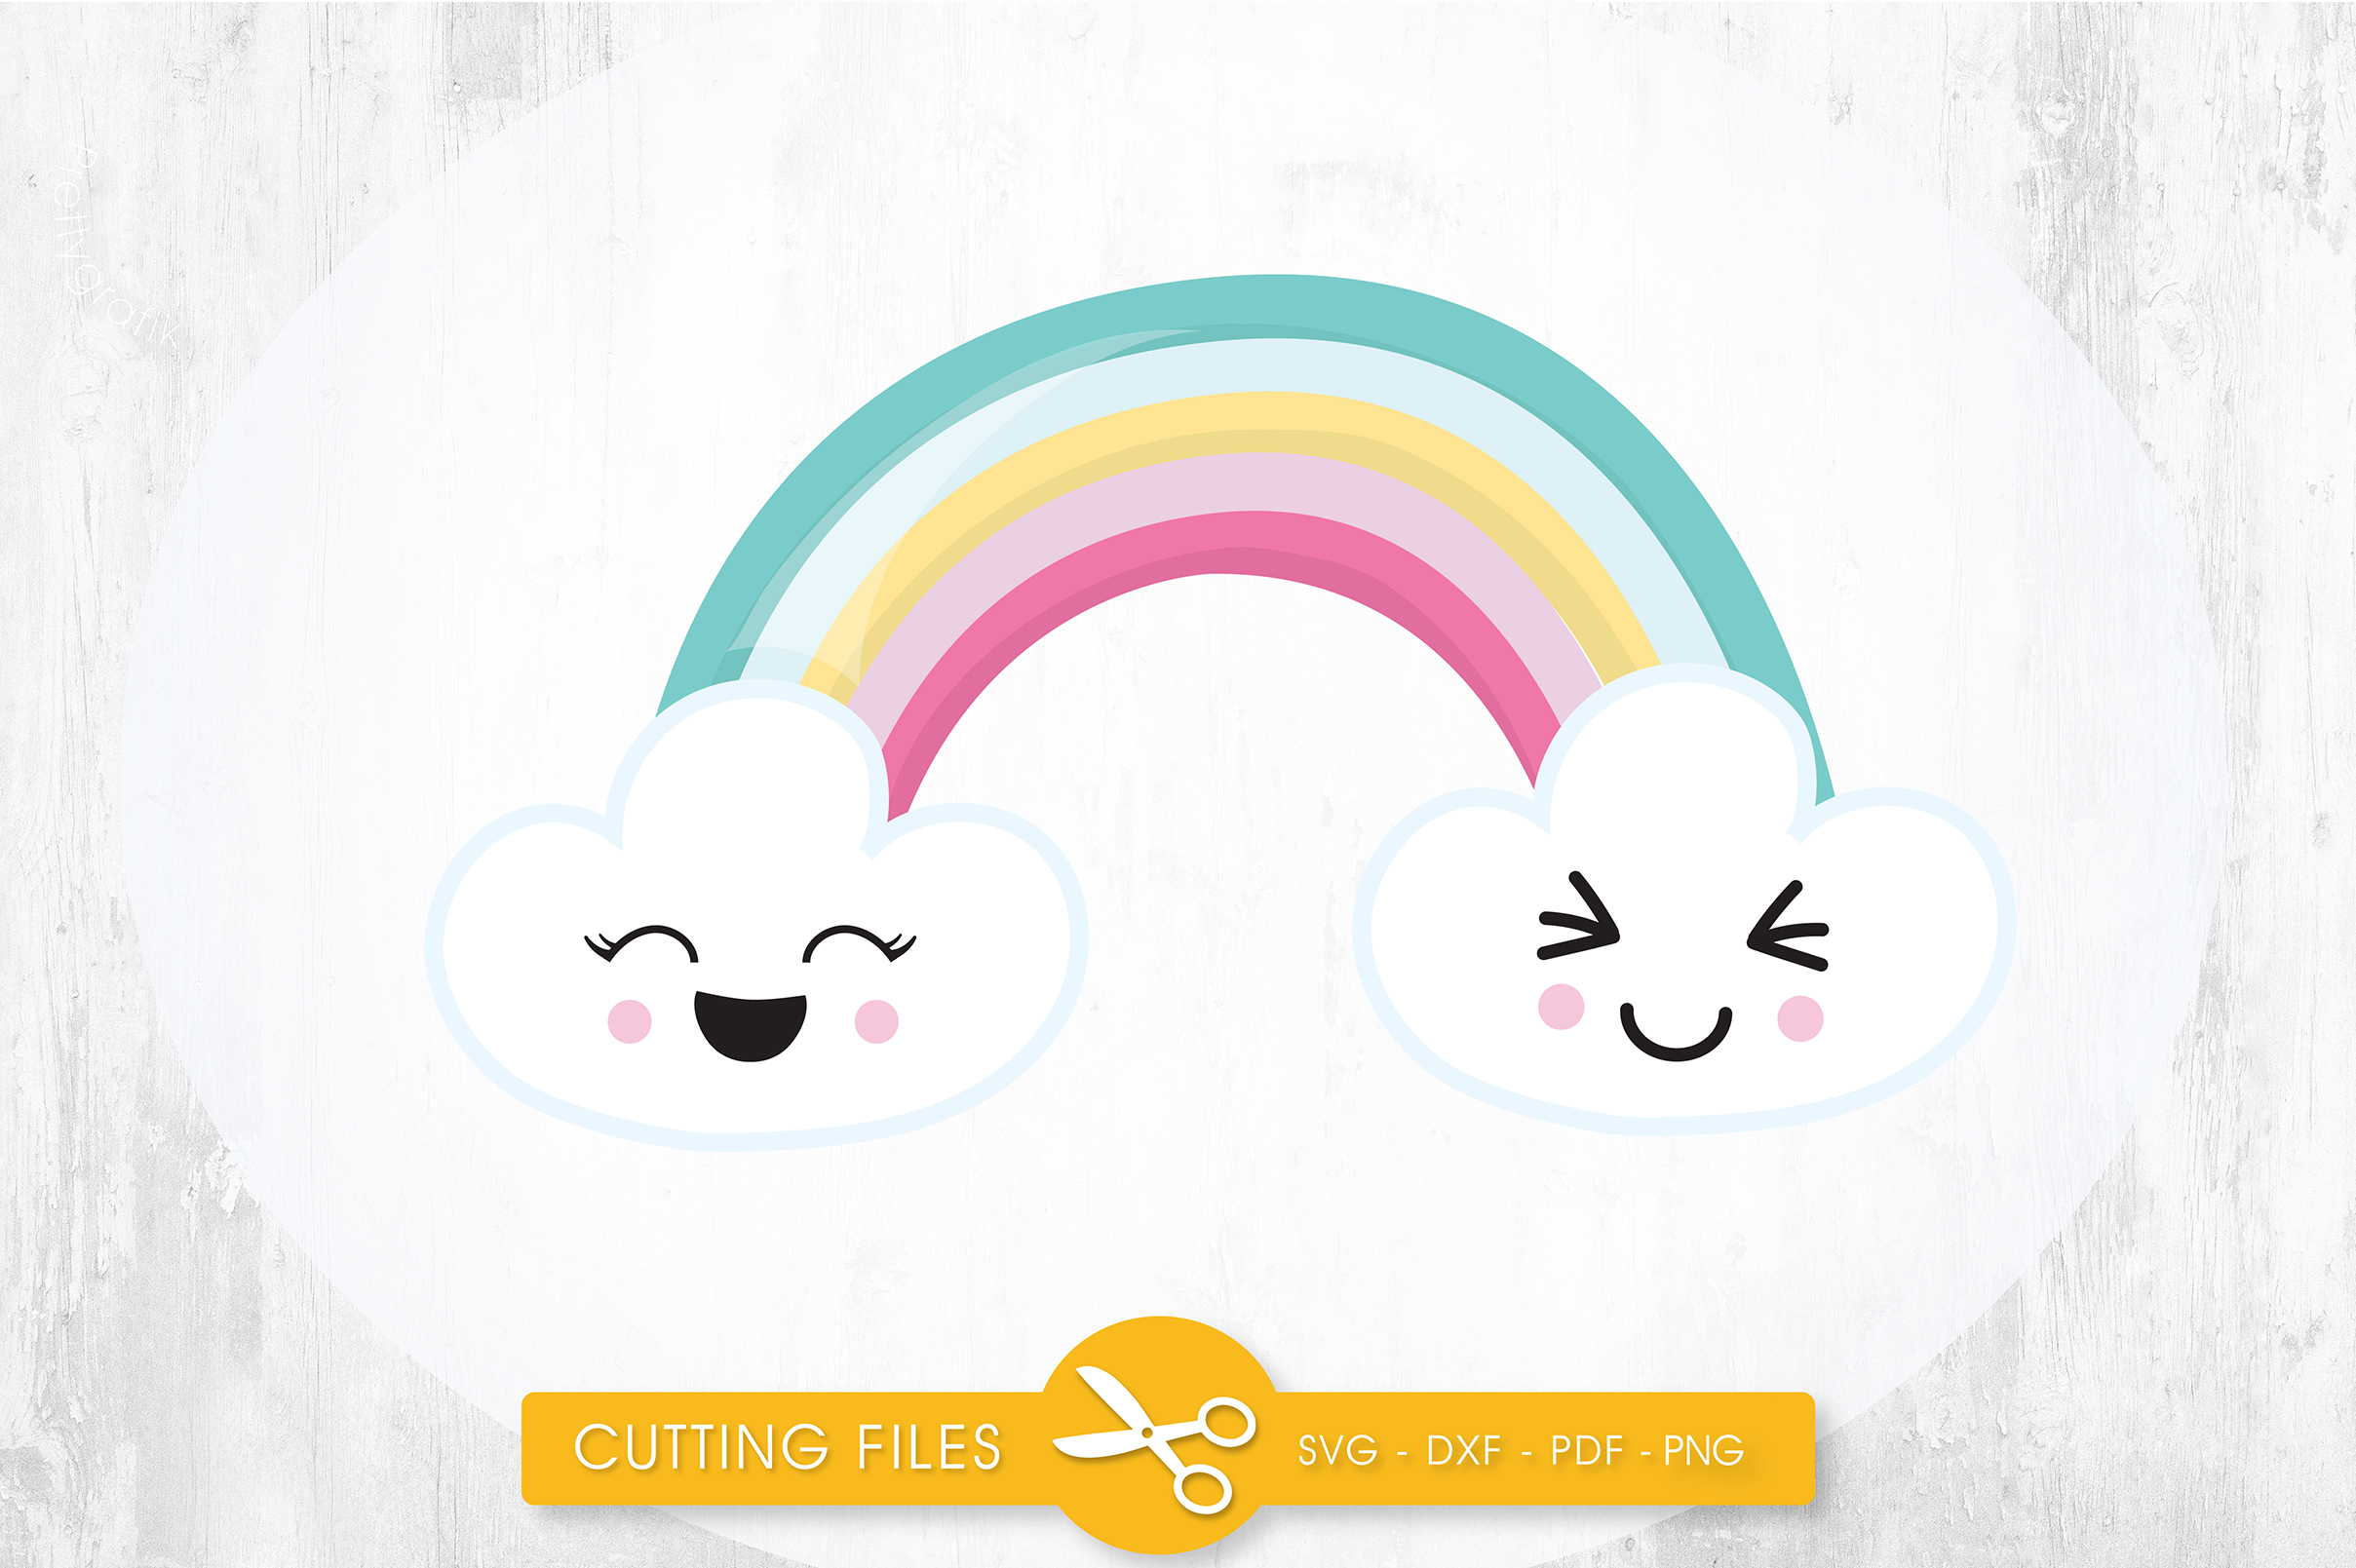 Magical Rainbow cutting files svg, dxf, pdf, eps included - cut files